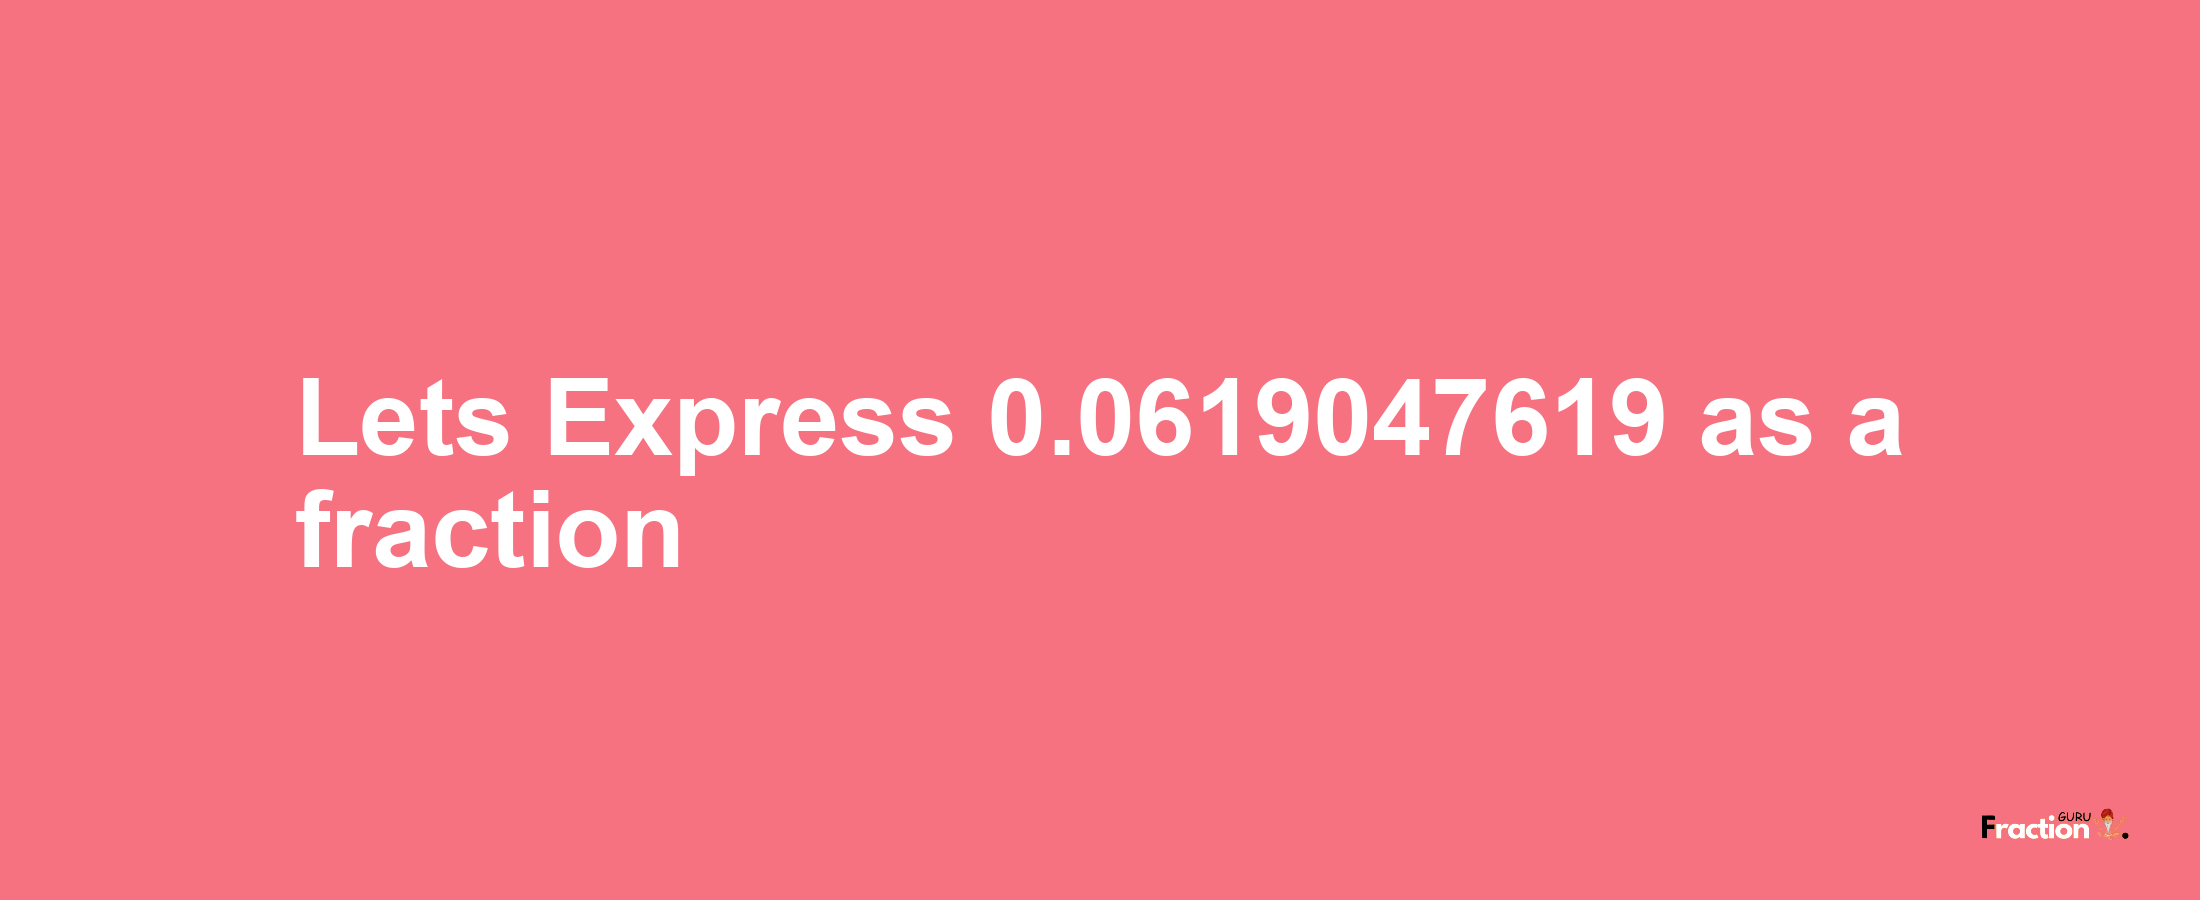 Lets Express 0.0619047619 as afraction